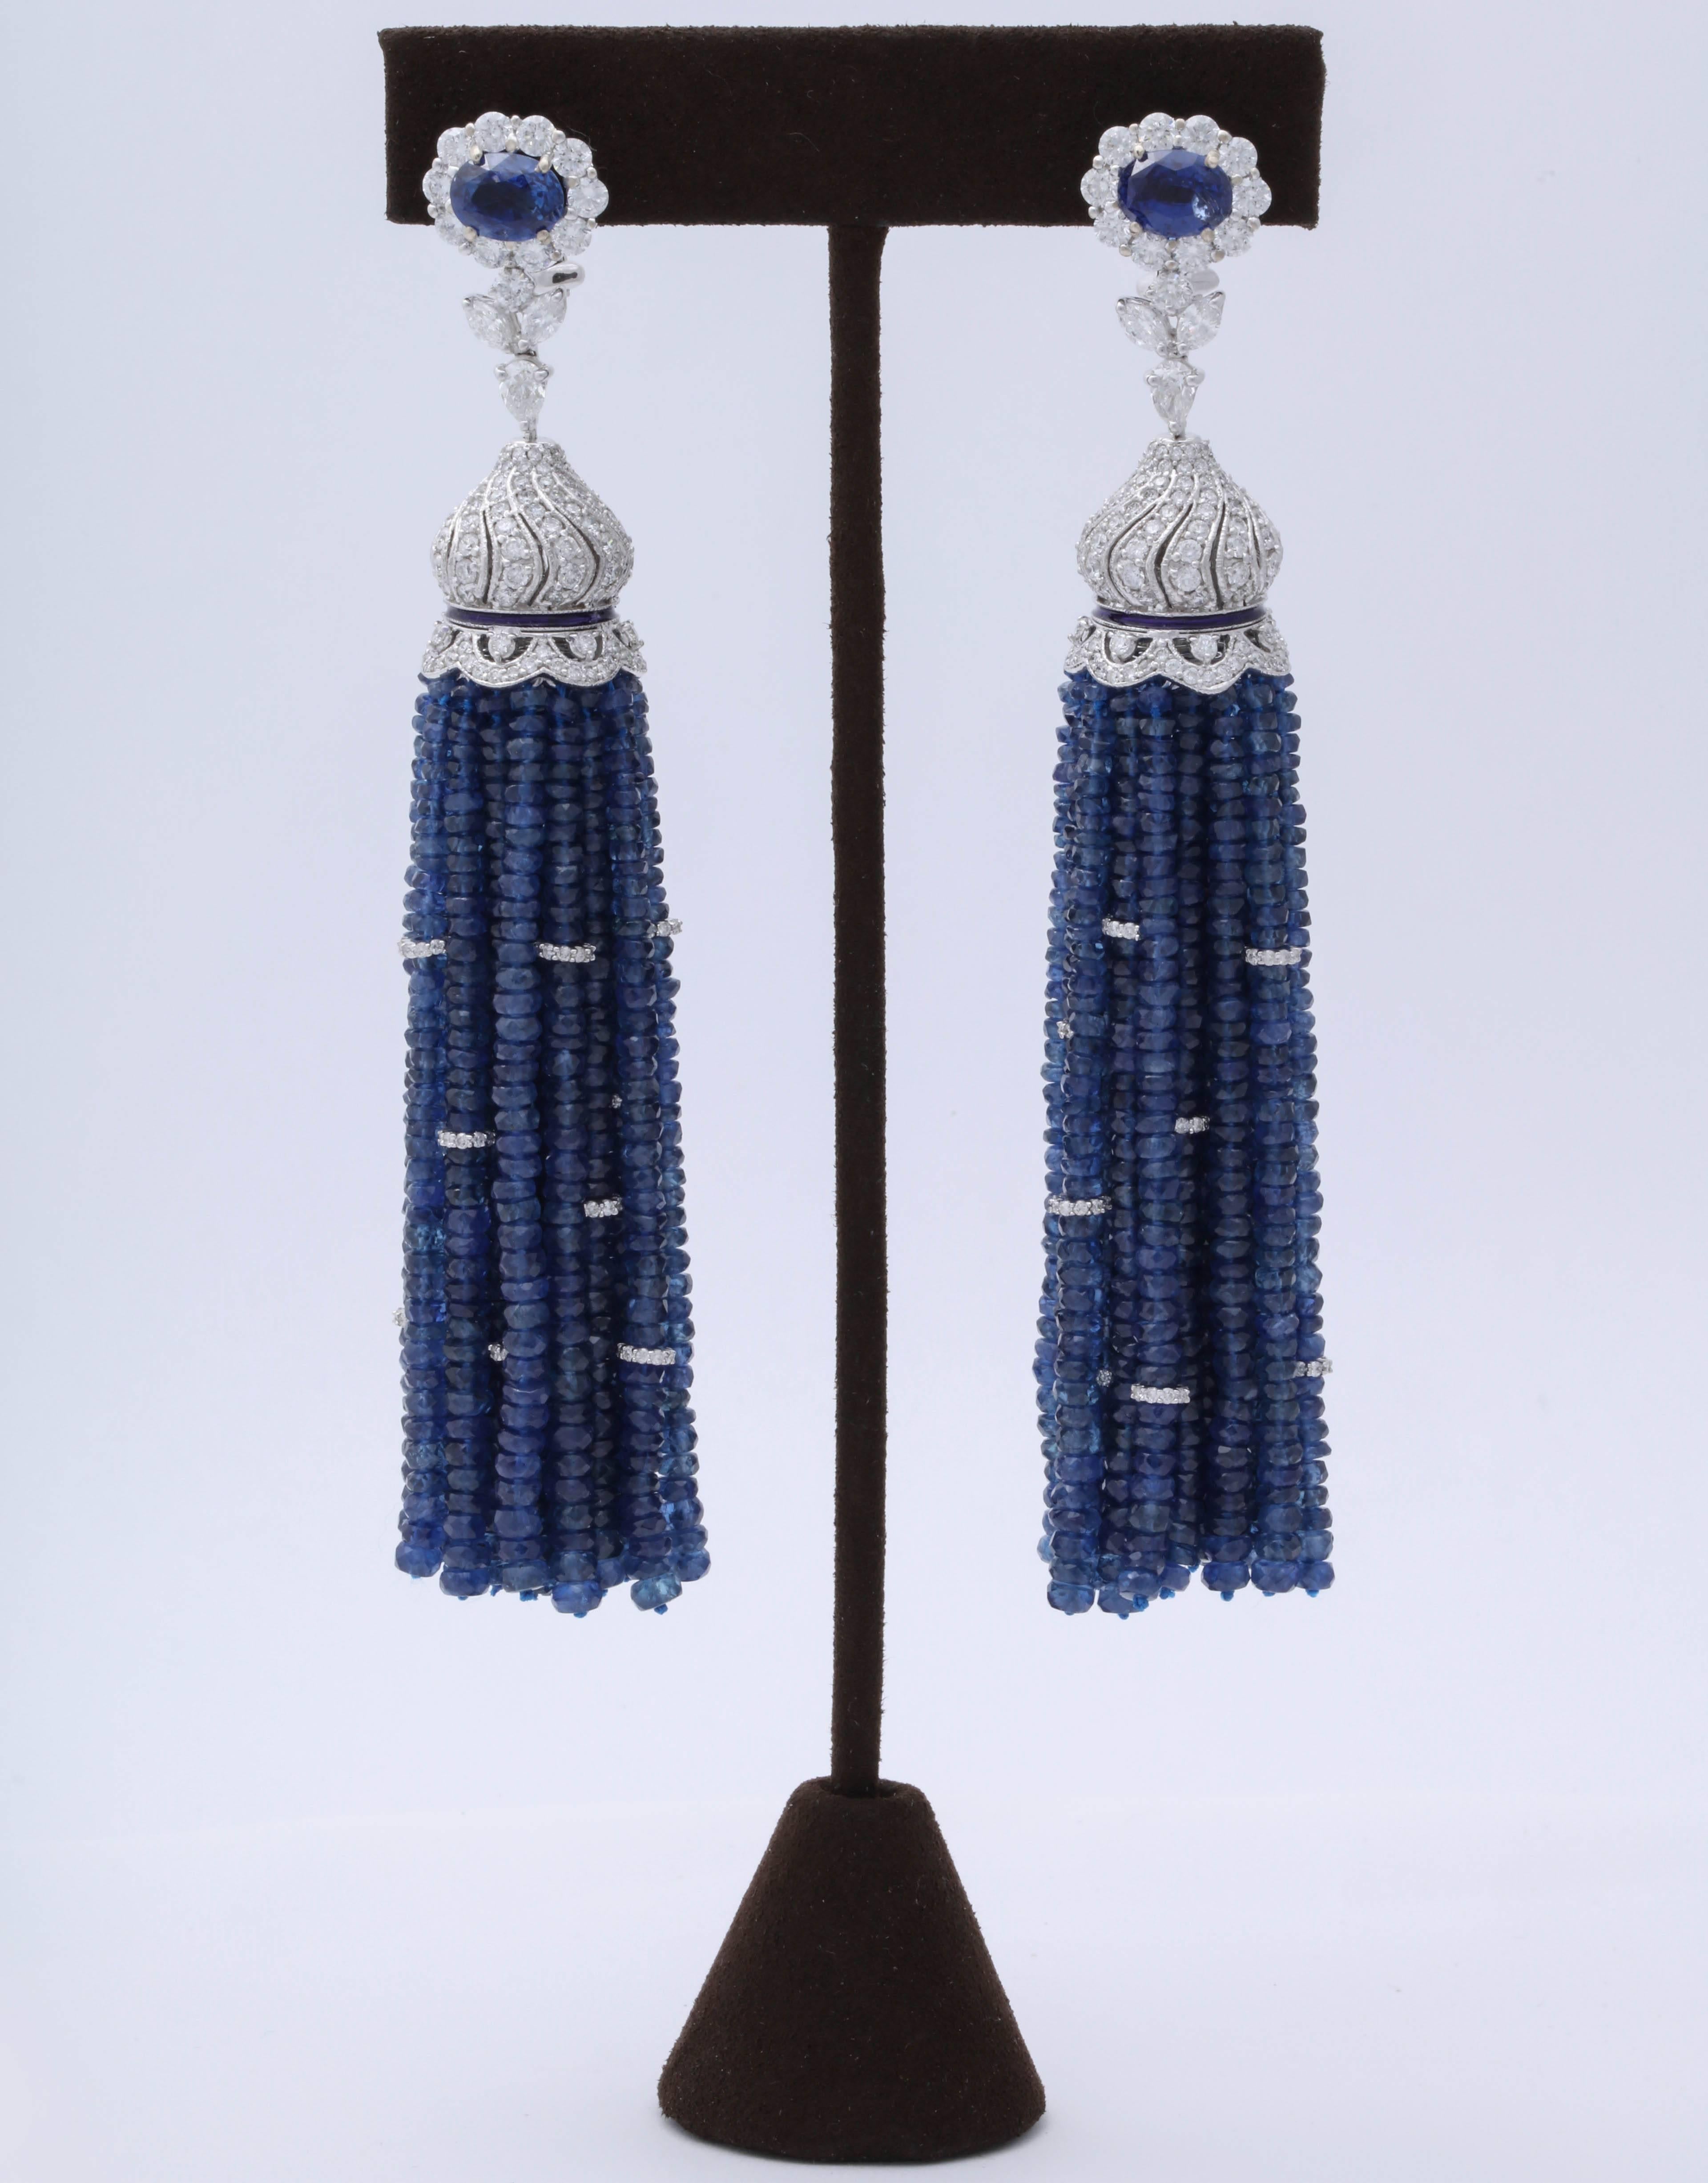 
Fabulous statement earrings! 

Over 300 carats of fine blue sapphire!   9.85 carats of diamonds!

Just over 4 inches in length 

18k white gold 

A one of a kind earring that can be worn casually or to a black tie affair. 